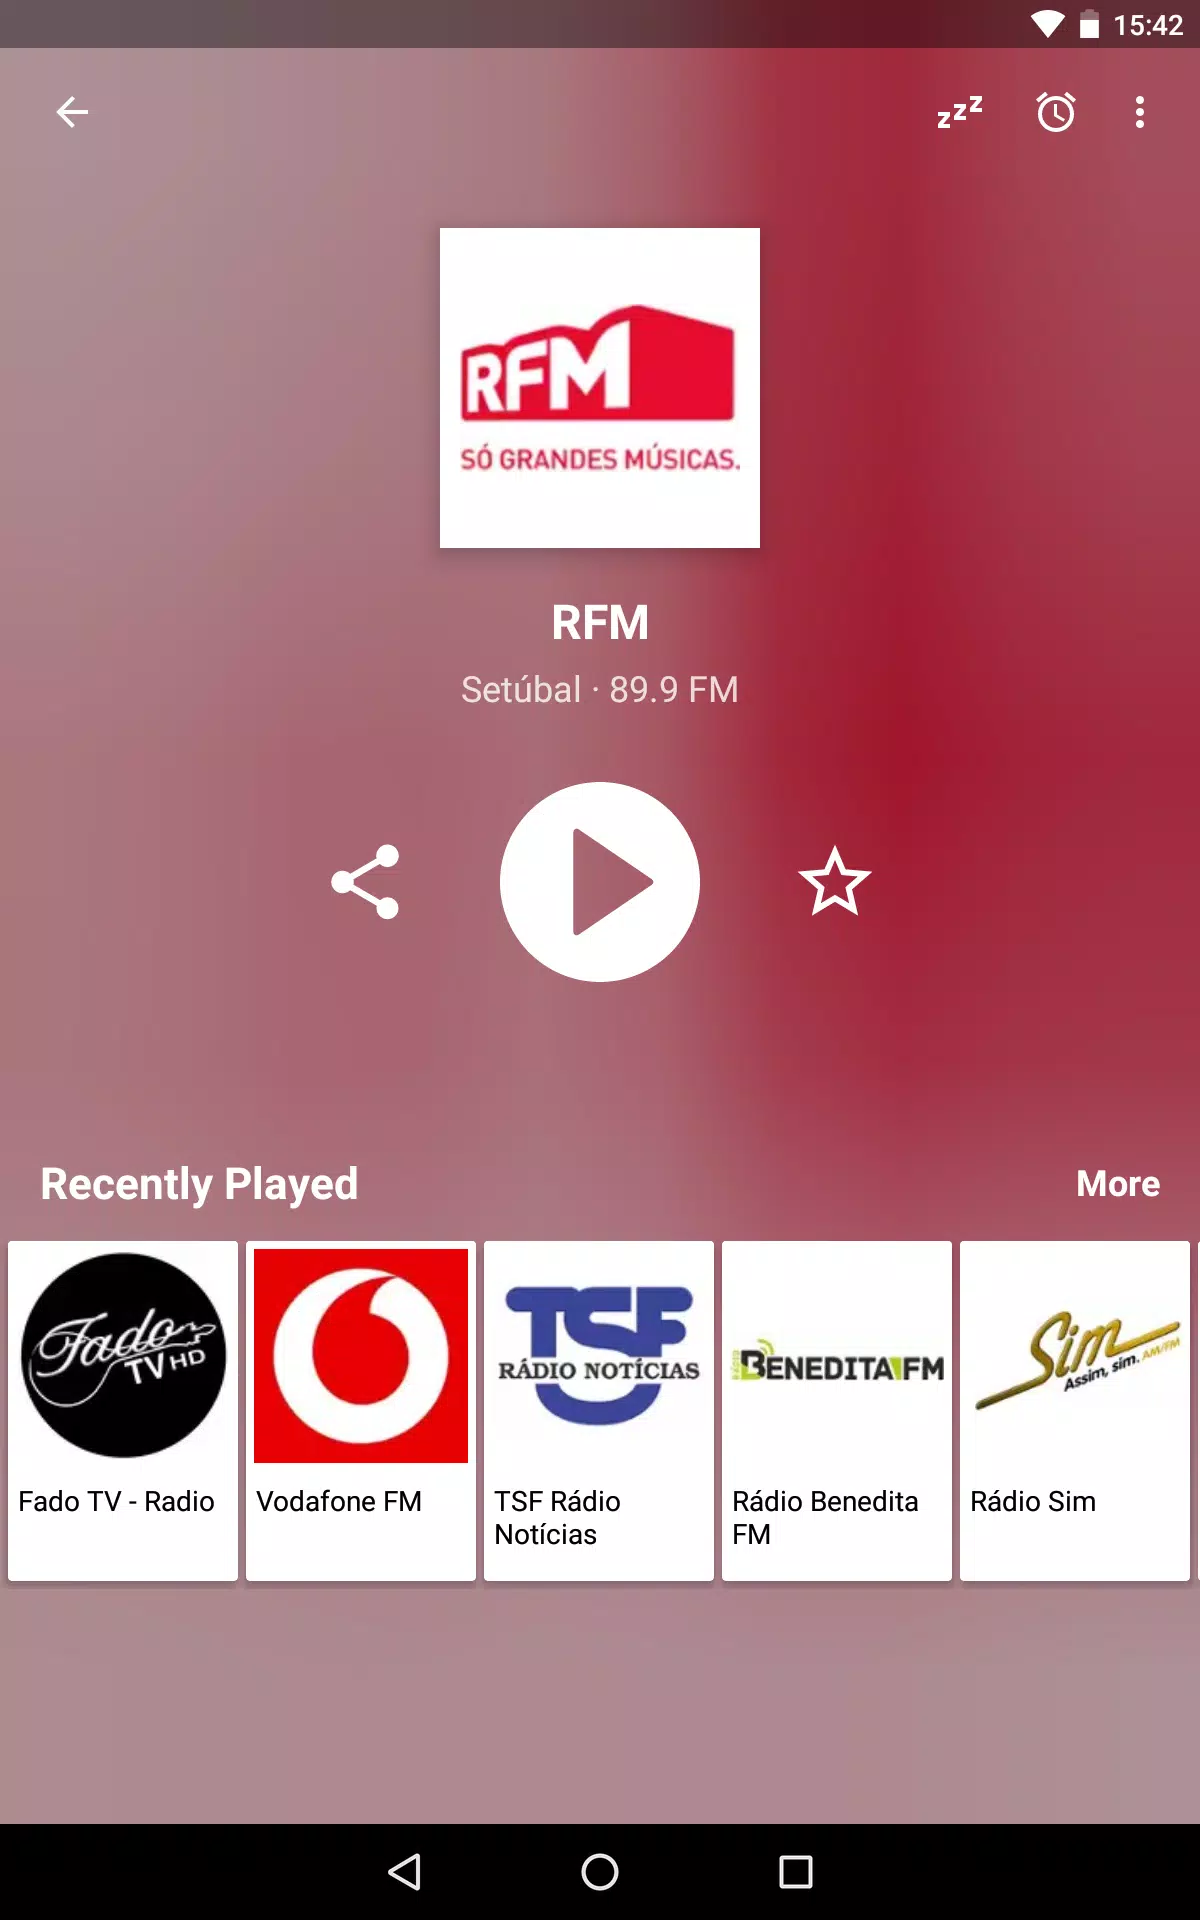 Radio FM Portugal APK for Android Download